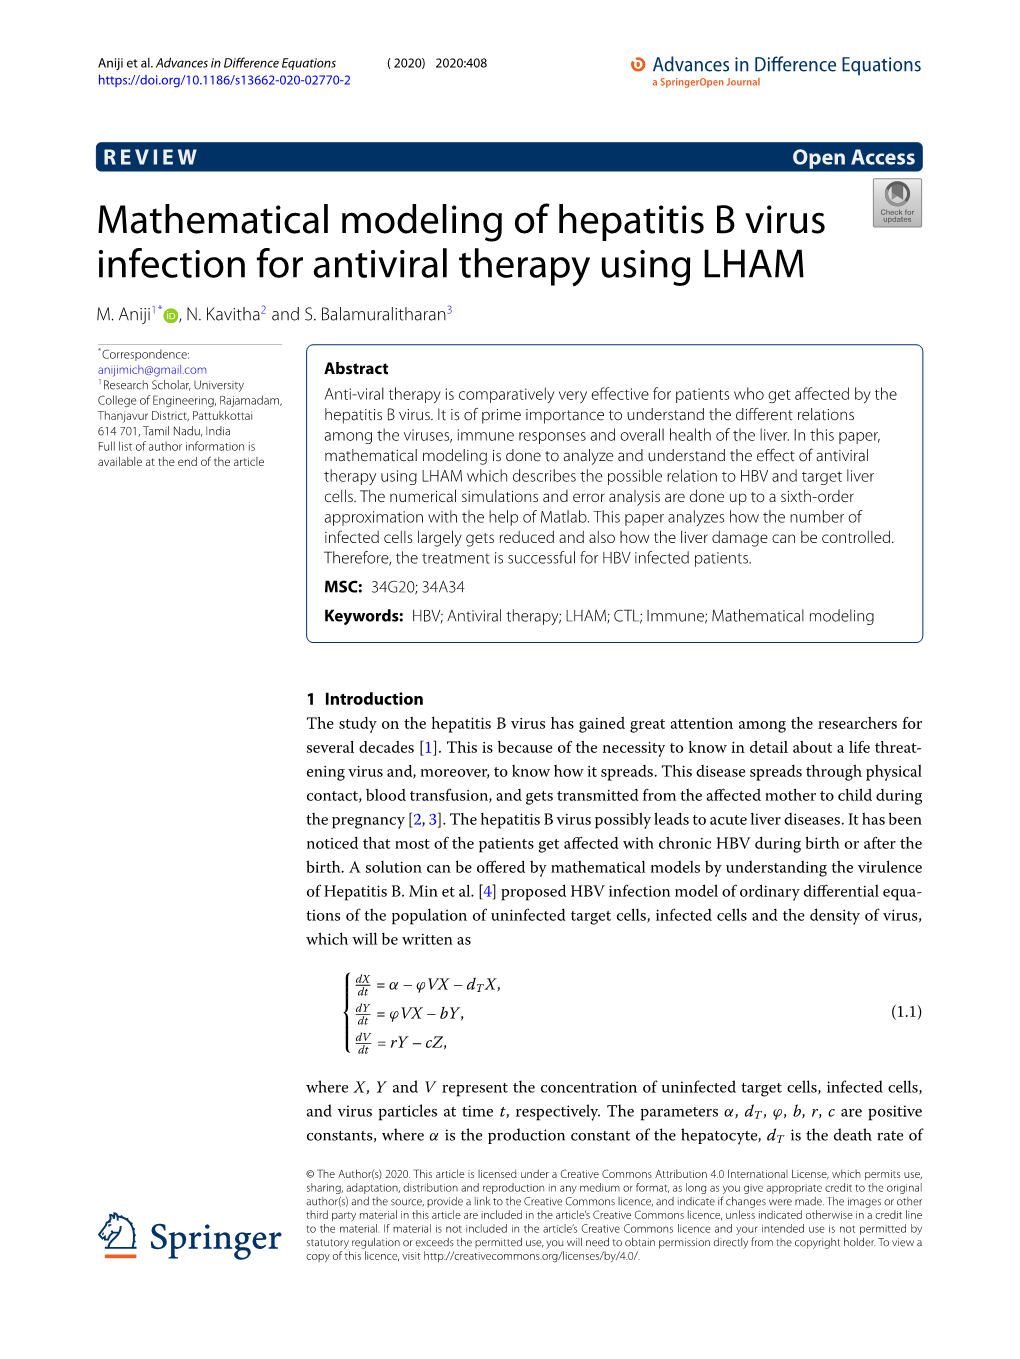 Mathematical Modeling of Hepatitis B Virus Infection for Antiviral Therapy Using LHAM